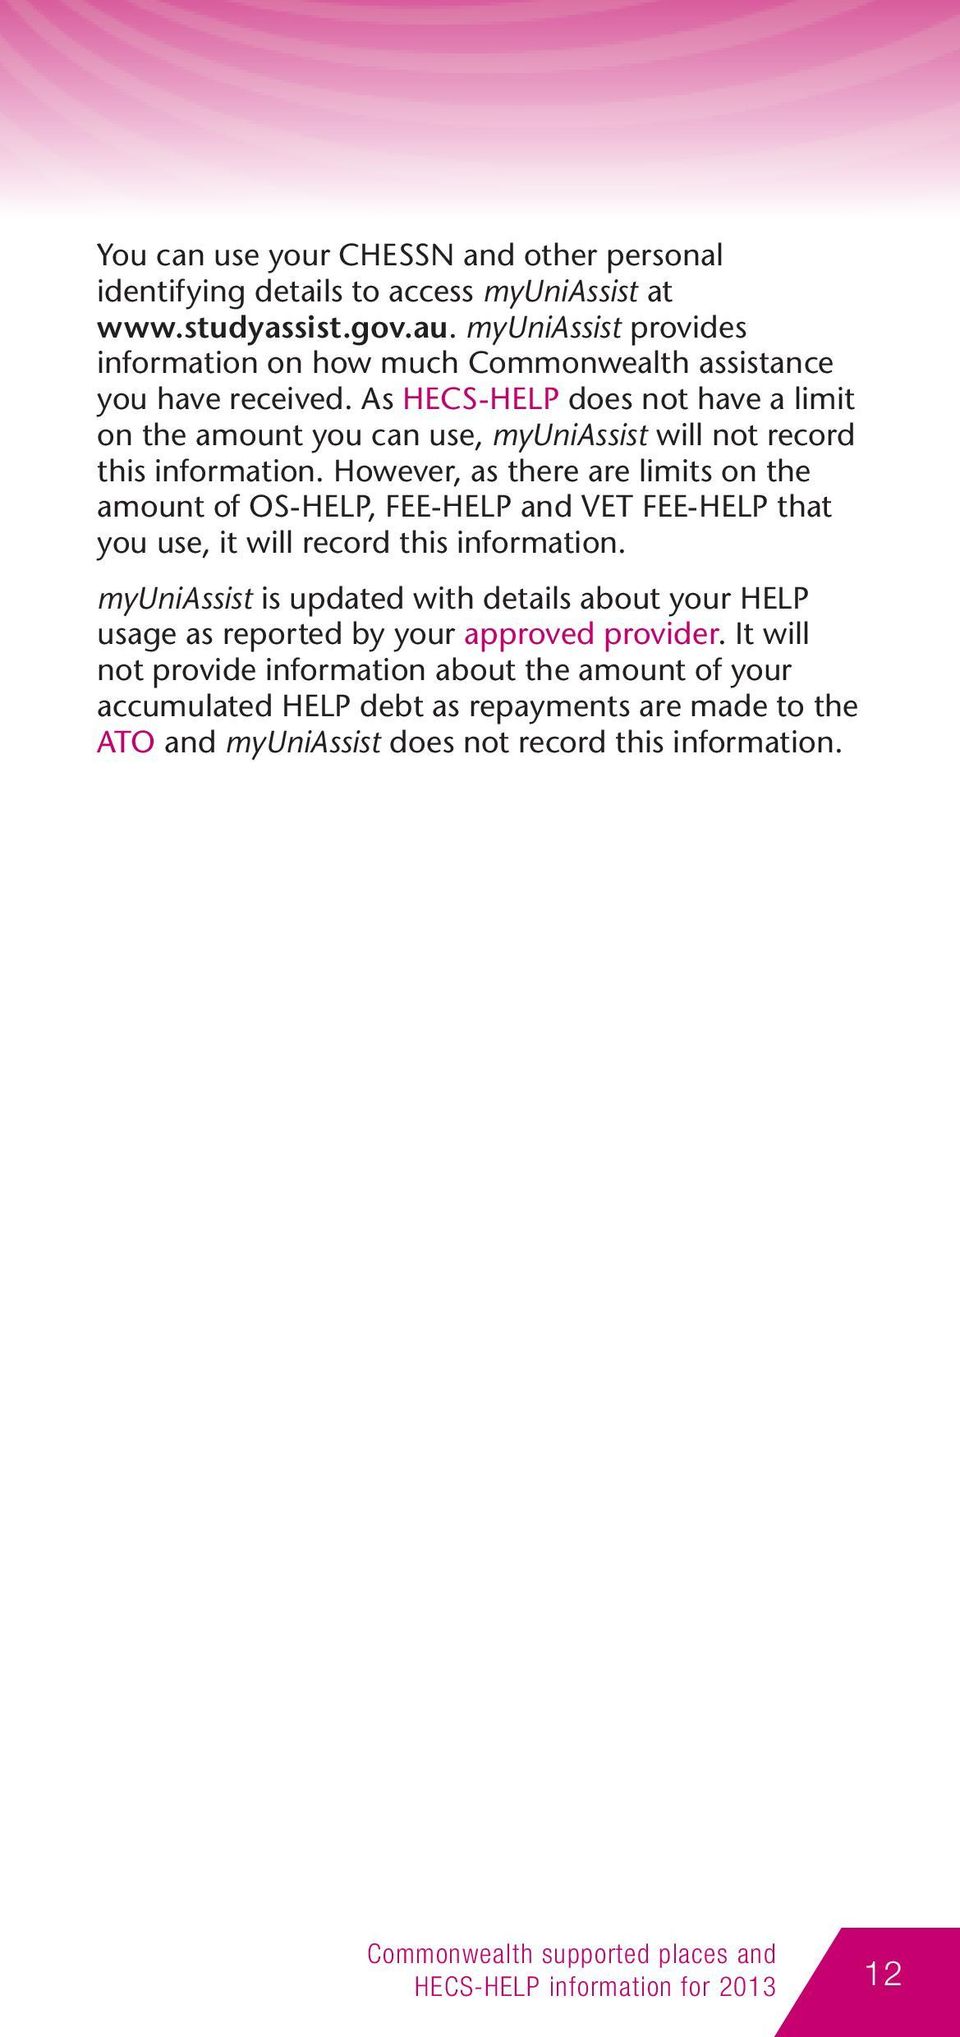 As HECS-HELP does not have a limit on the amount you can use, myuniassist will not record this information.